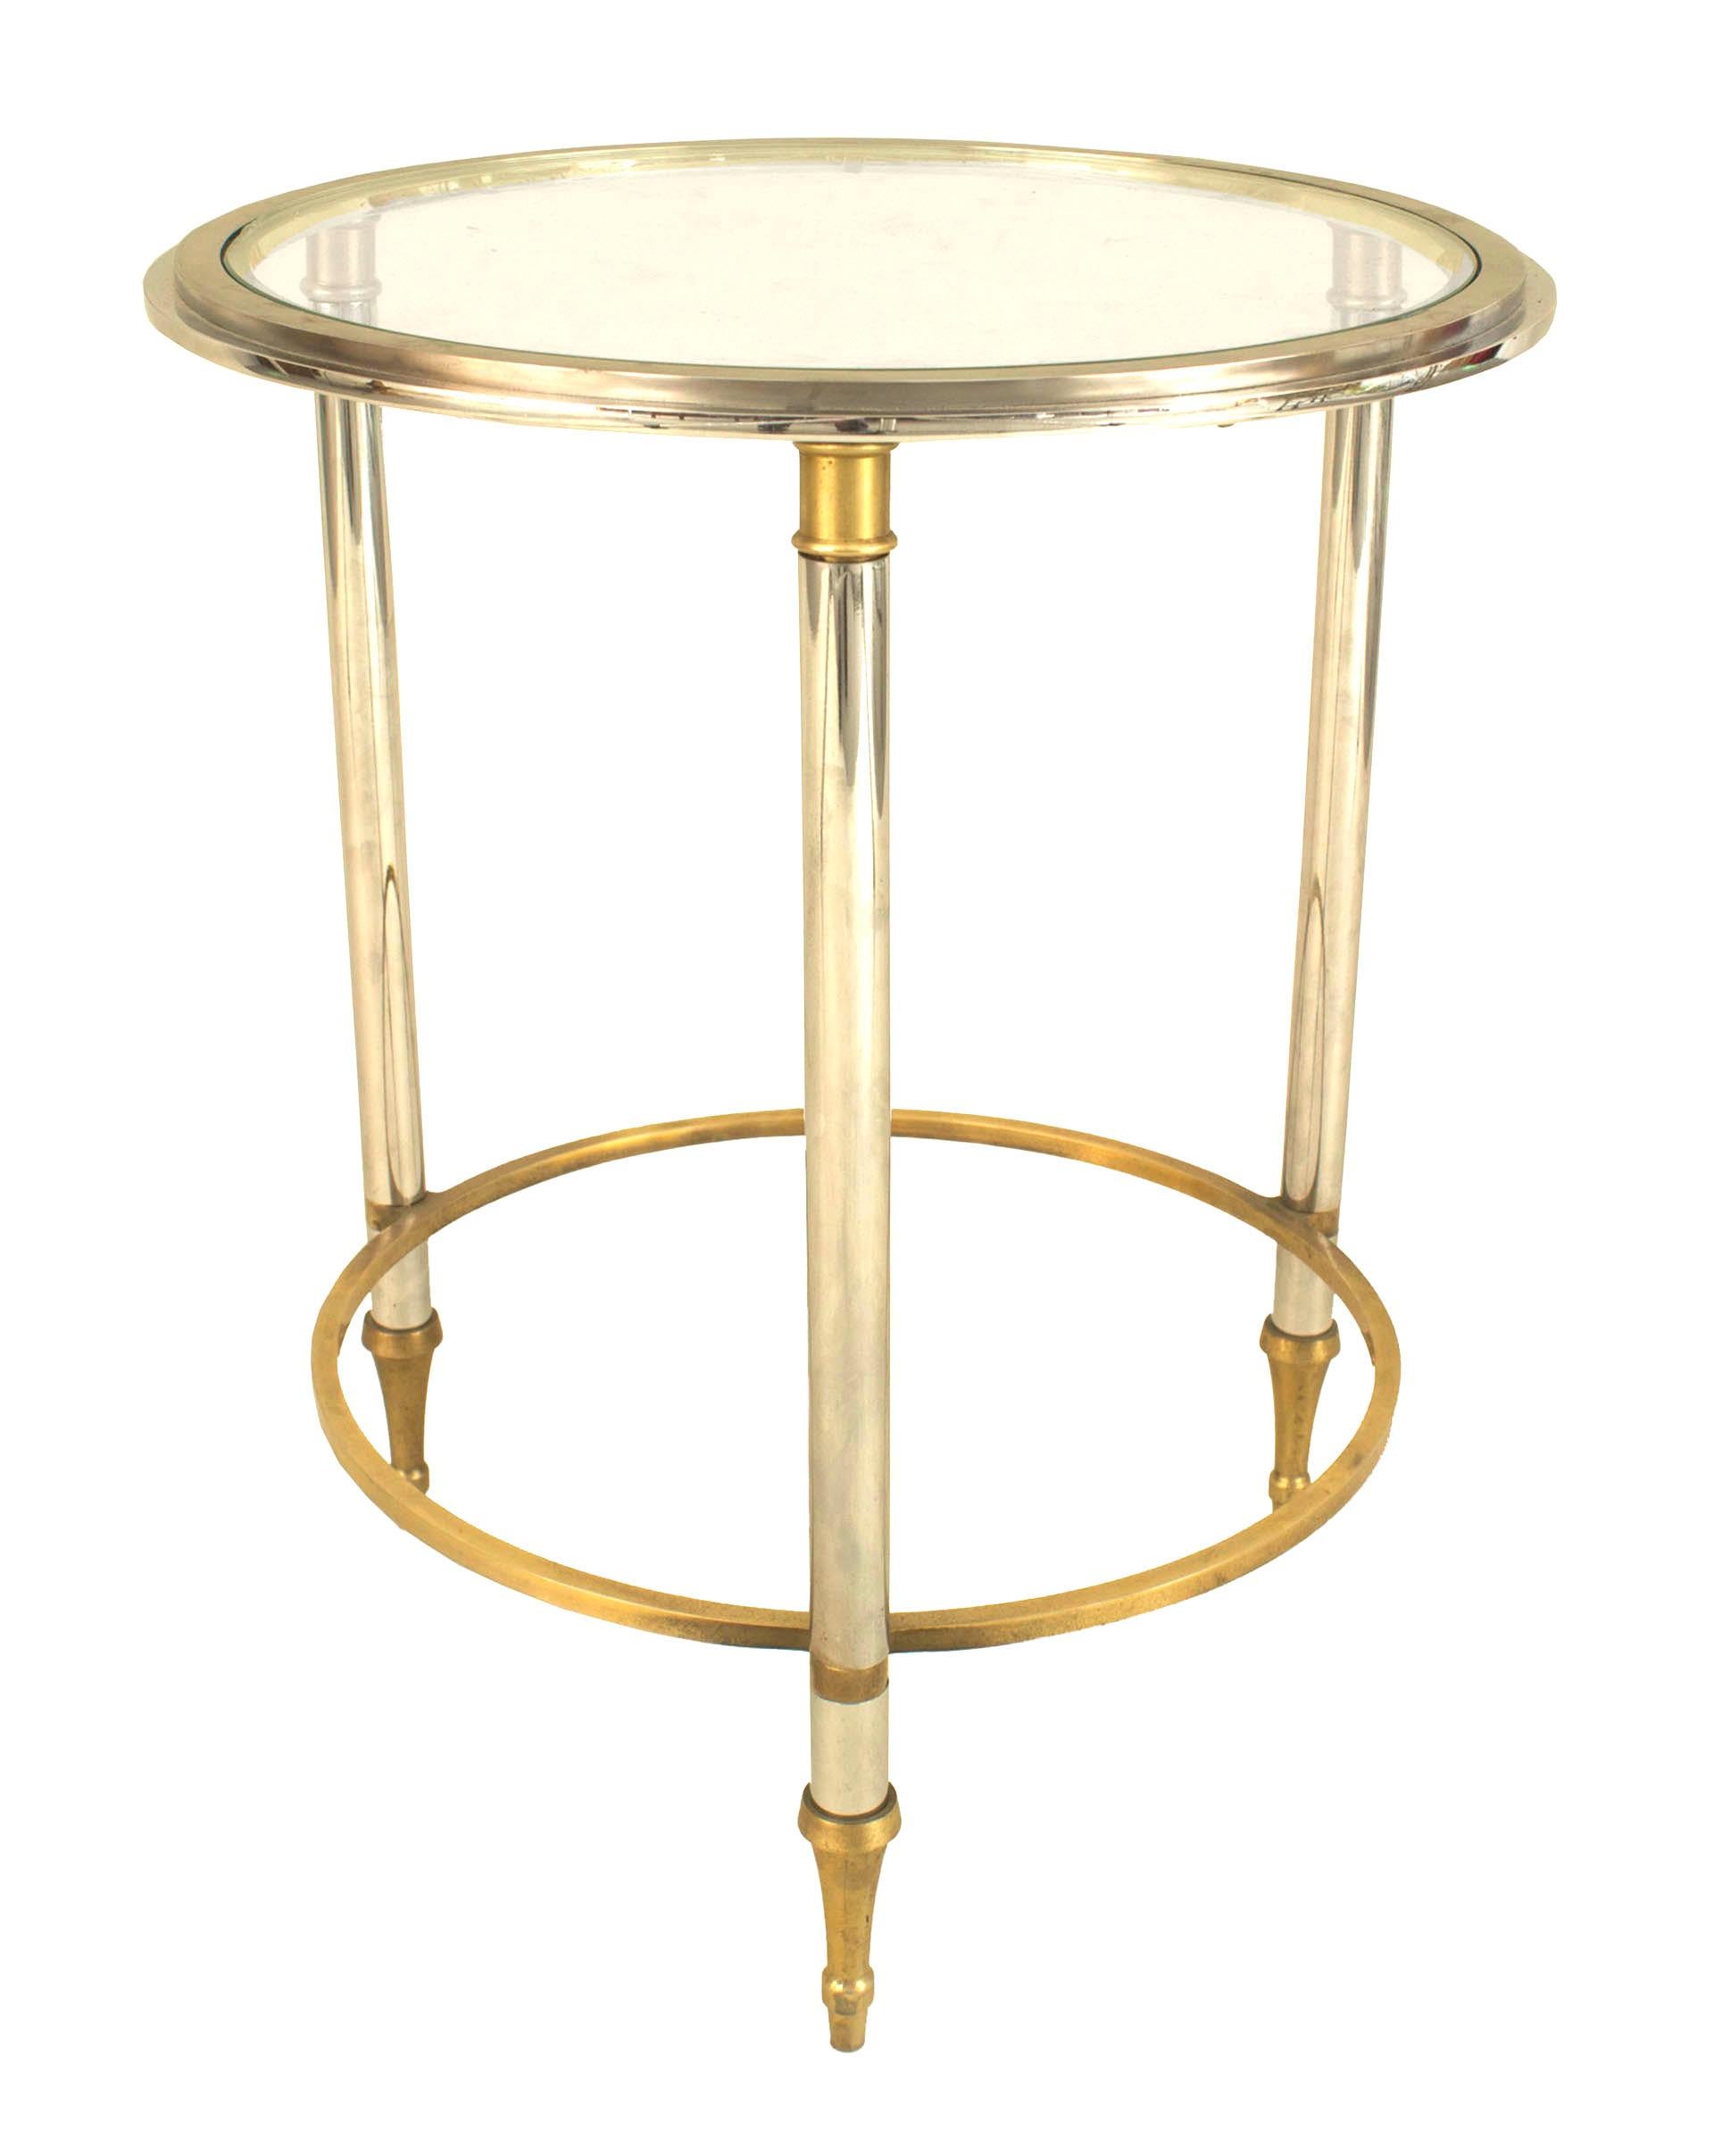 Pair of French 1940s gilt bronze trim end tables with 3 tubular glass legs connected with a ring stretcher supporting a round inset glass top (att: JANSEN).

Maison Jansen was a Paris-based interior decoration office founded in 1880 by Dutch-born